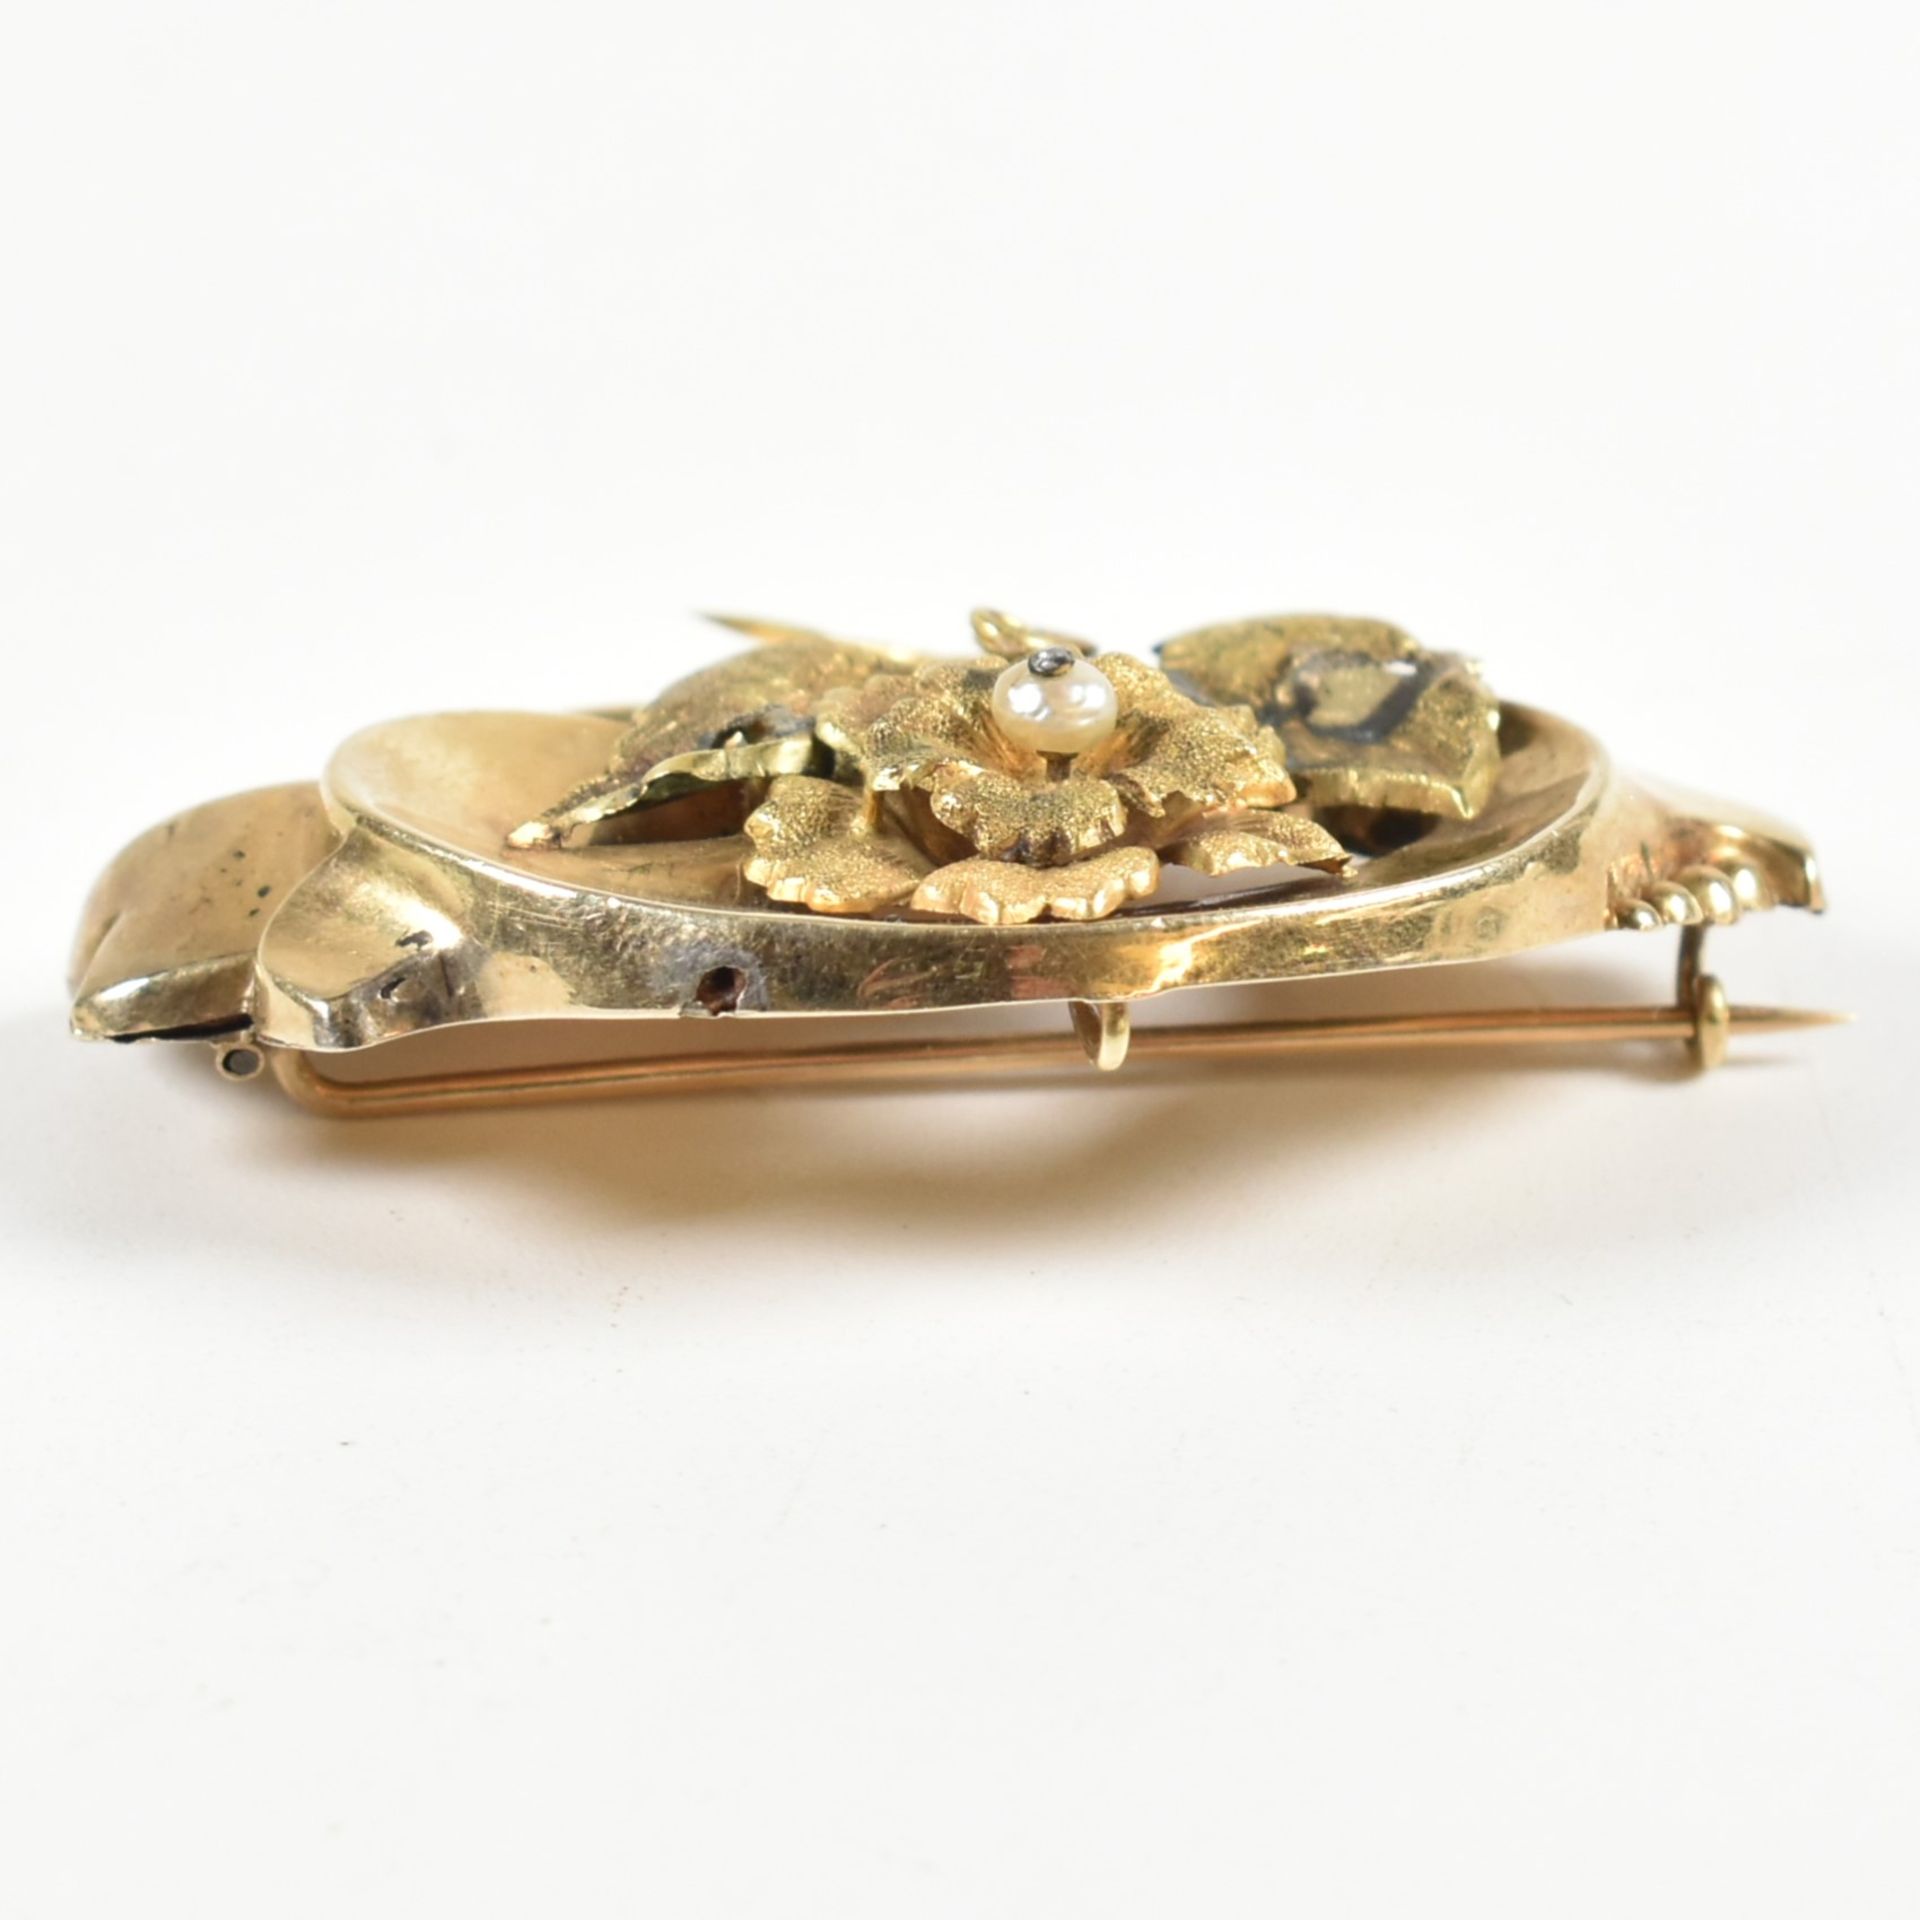 19TH CENTURY GOLD & PEARL FLORAL BROOCH PIN - Image 7 of 8